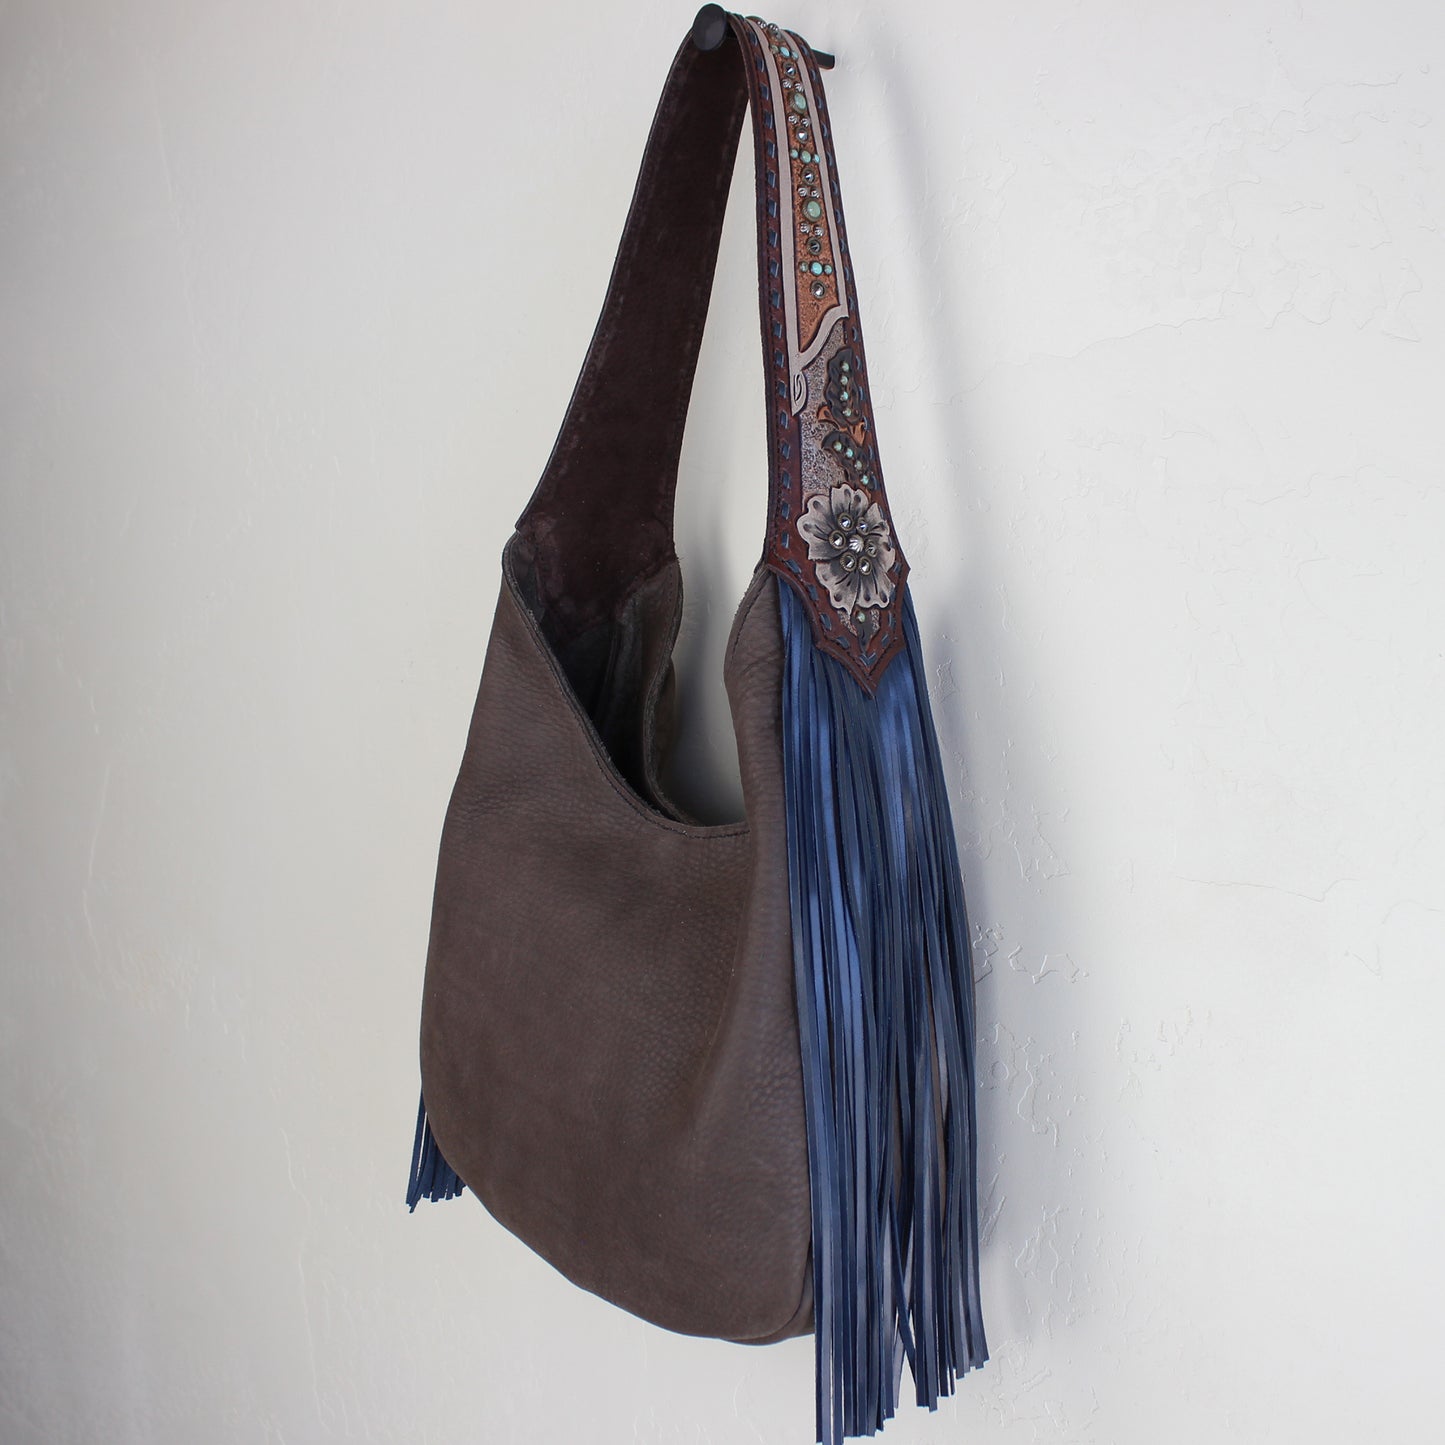 
                  
                    A brown leather Marilyn bag #1095 by Heritage Brand with a decorative strap and blue tassel hanging against a white wall.
                  
                